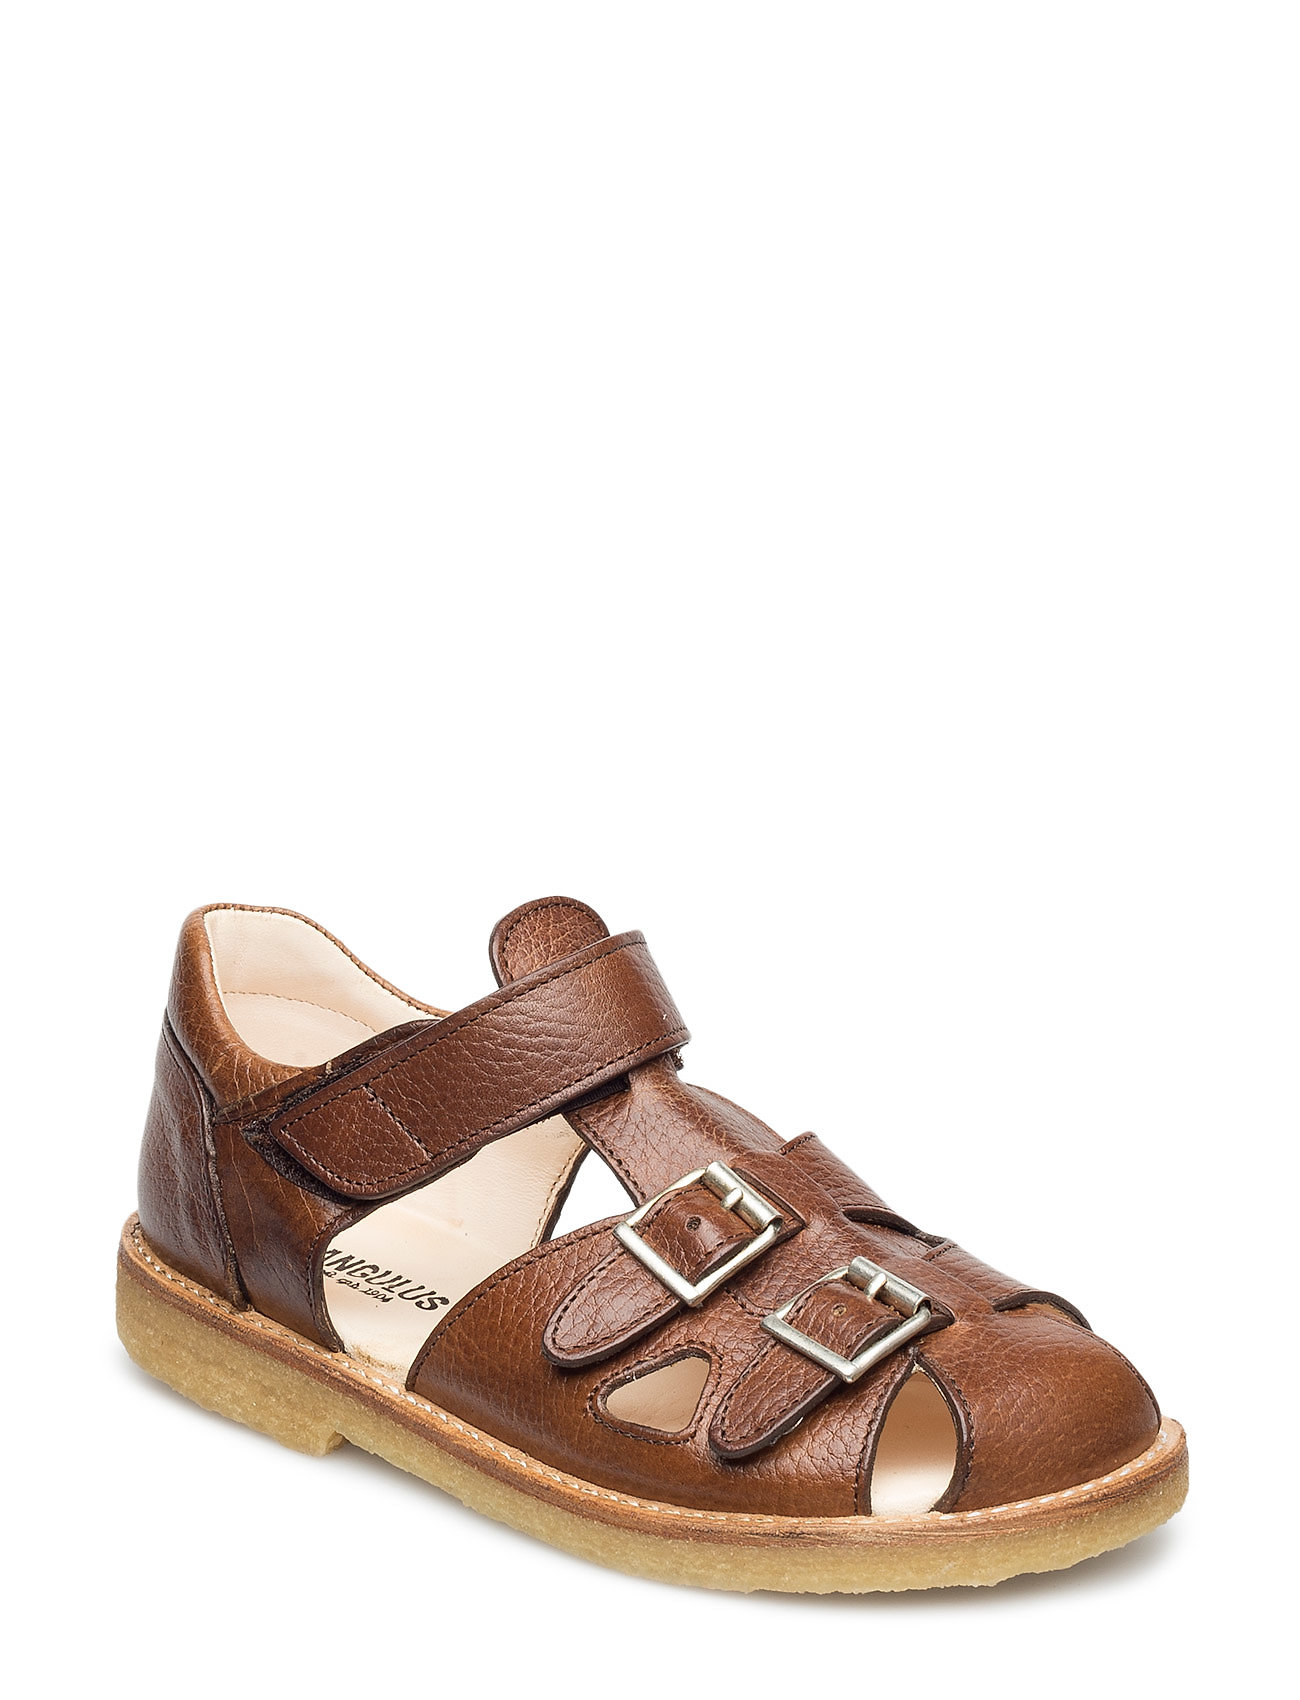 Sandal With Two Buckles In Front Shoes Summer Shoes Sandals Ruskea ANGULUS